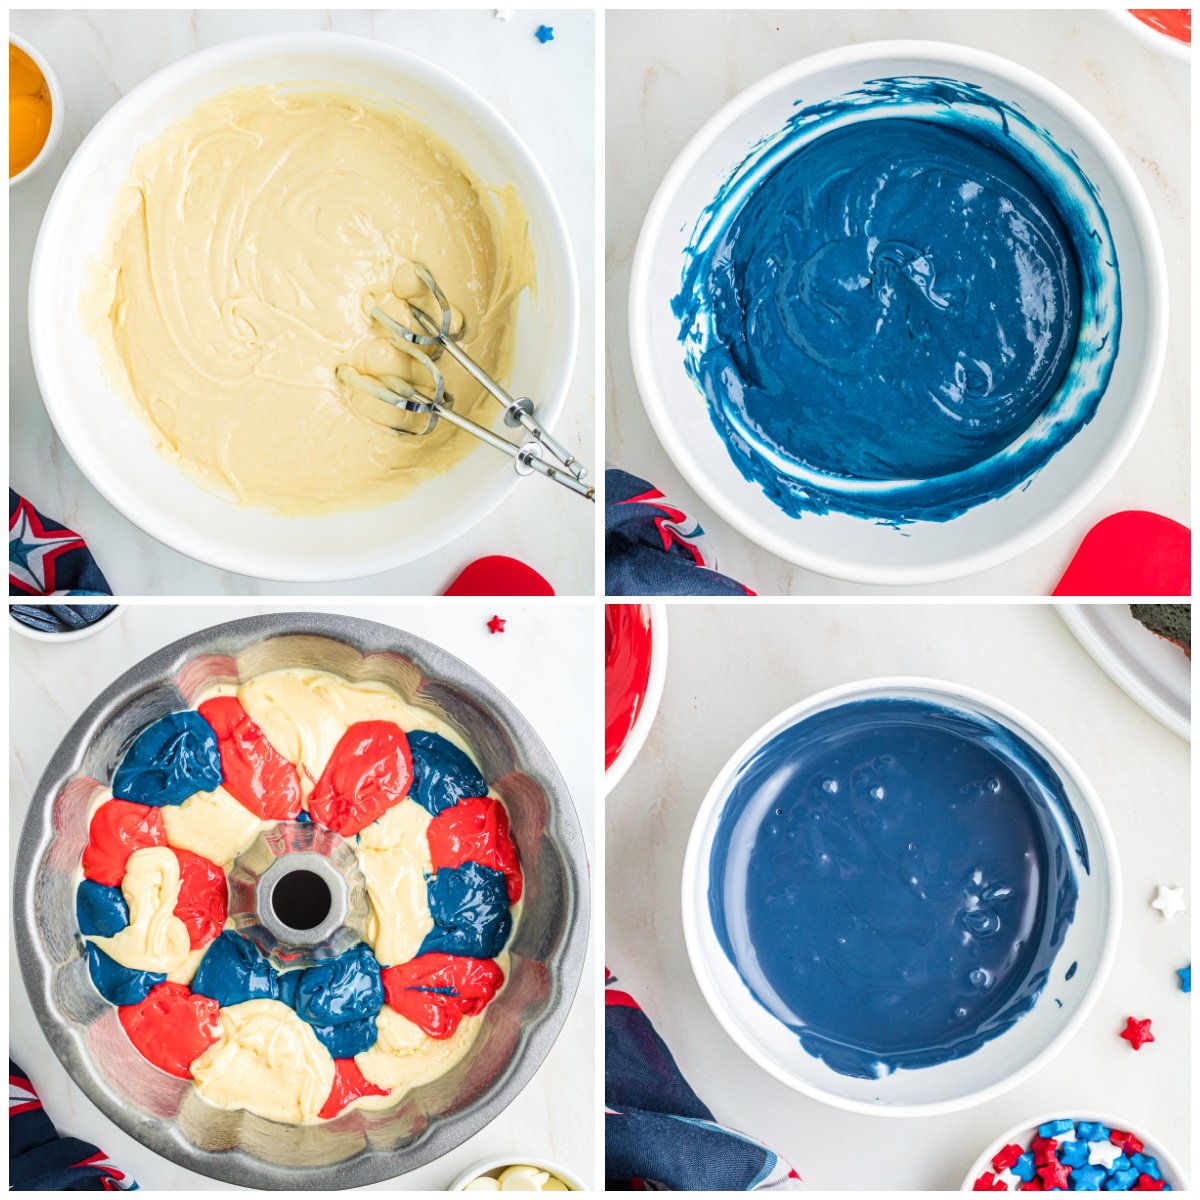 Step by step photos on how to make a Patriotic Bundt Cake.